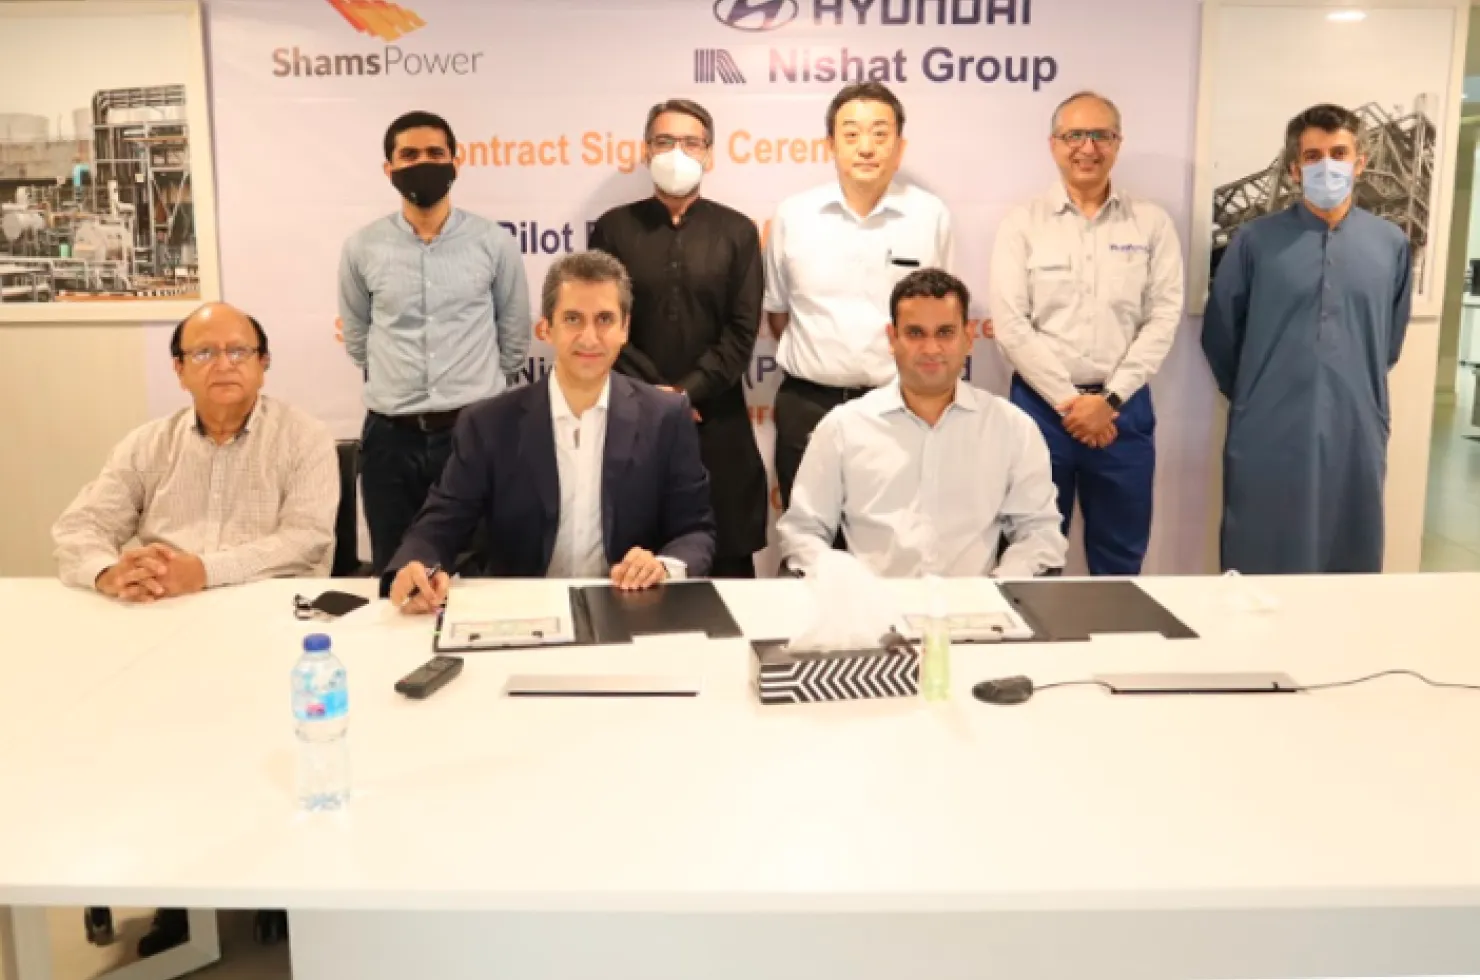 Shams Power (Private) Limited and Hyundai Nishat Motor (Private) Limited have partnered to solarize Hyundai’s automobile manufacturing plant with an initial capacity of 1MWp